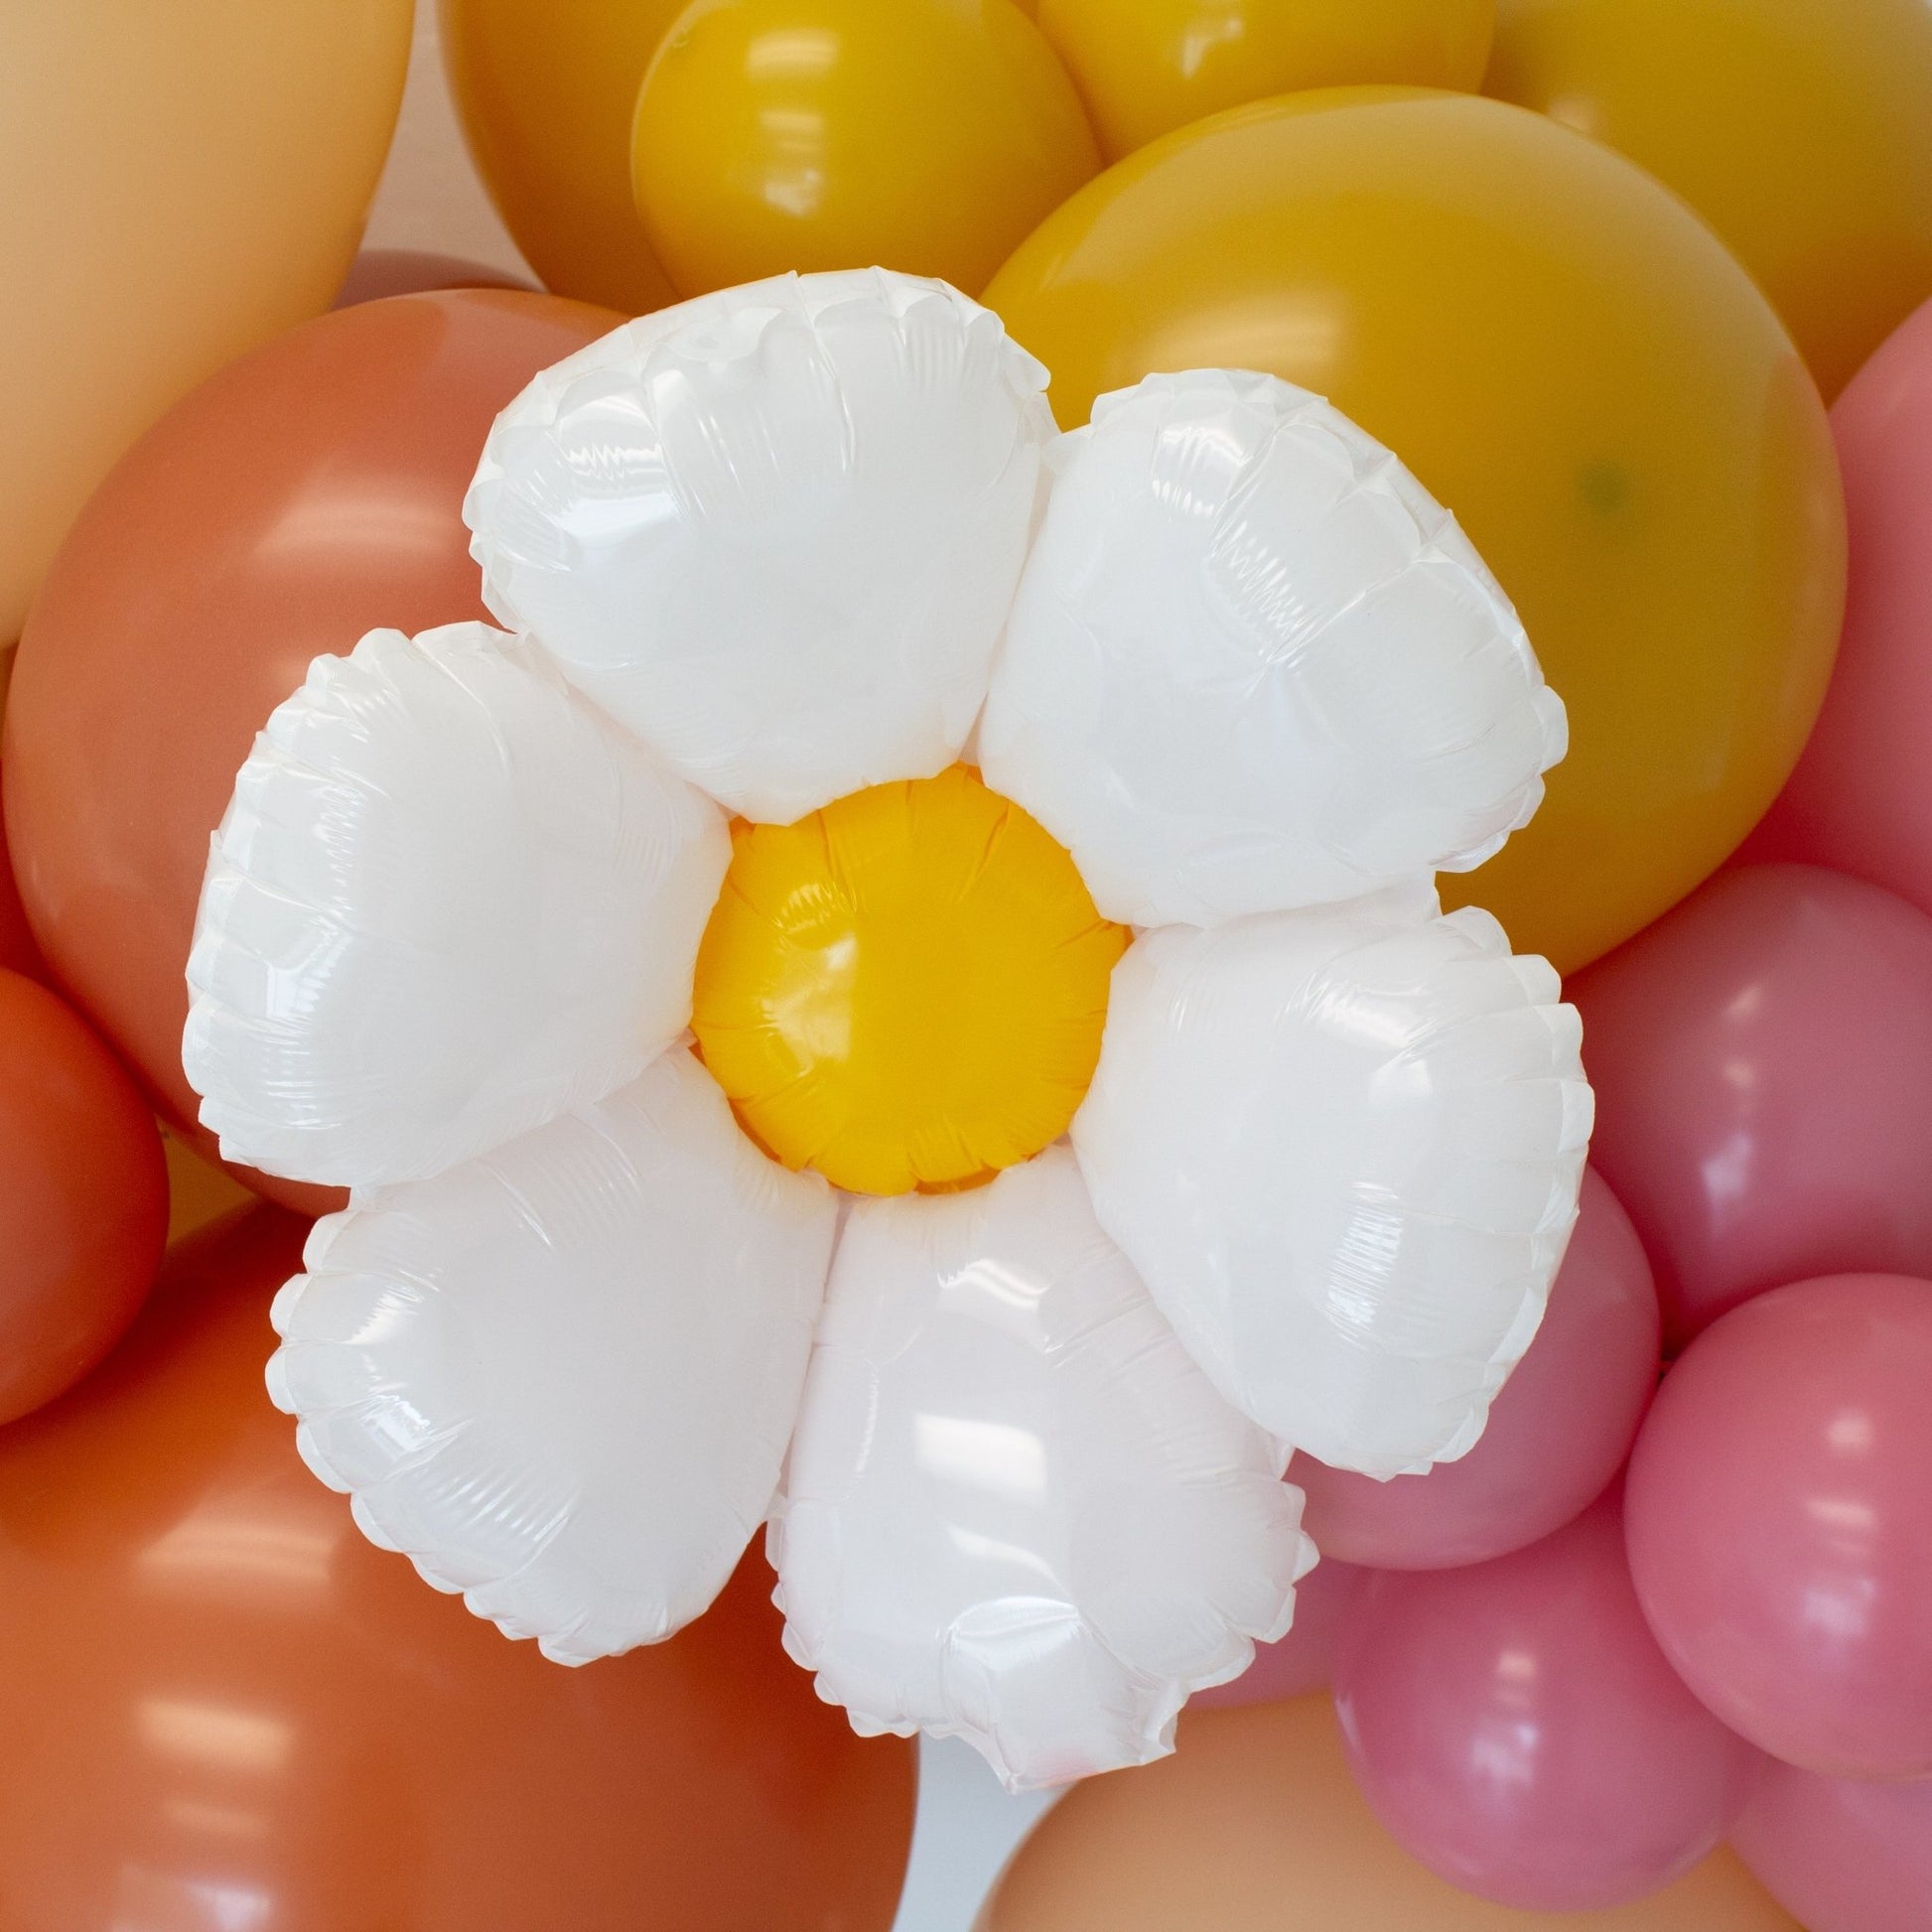 Daisy White and Yellow Flower Balloons from Ellie's Party Supply